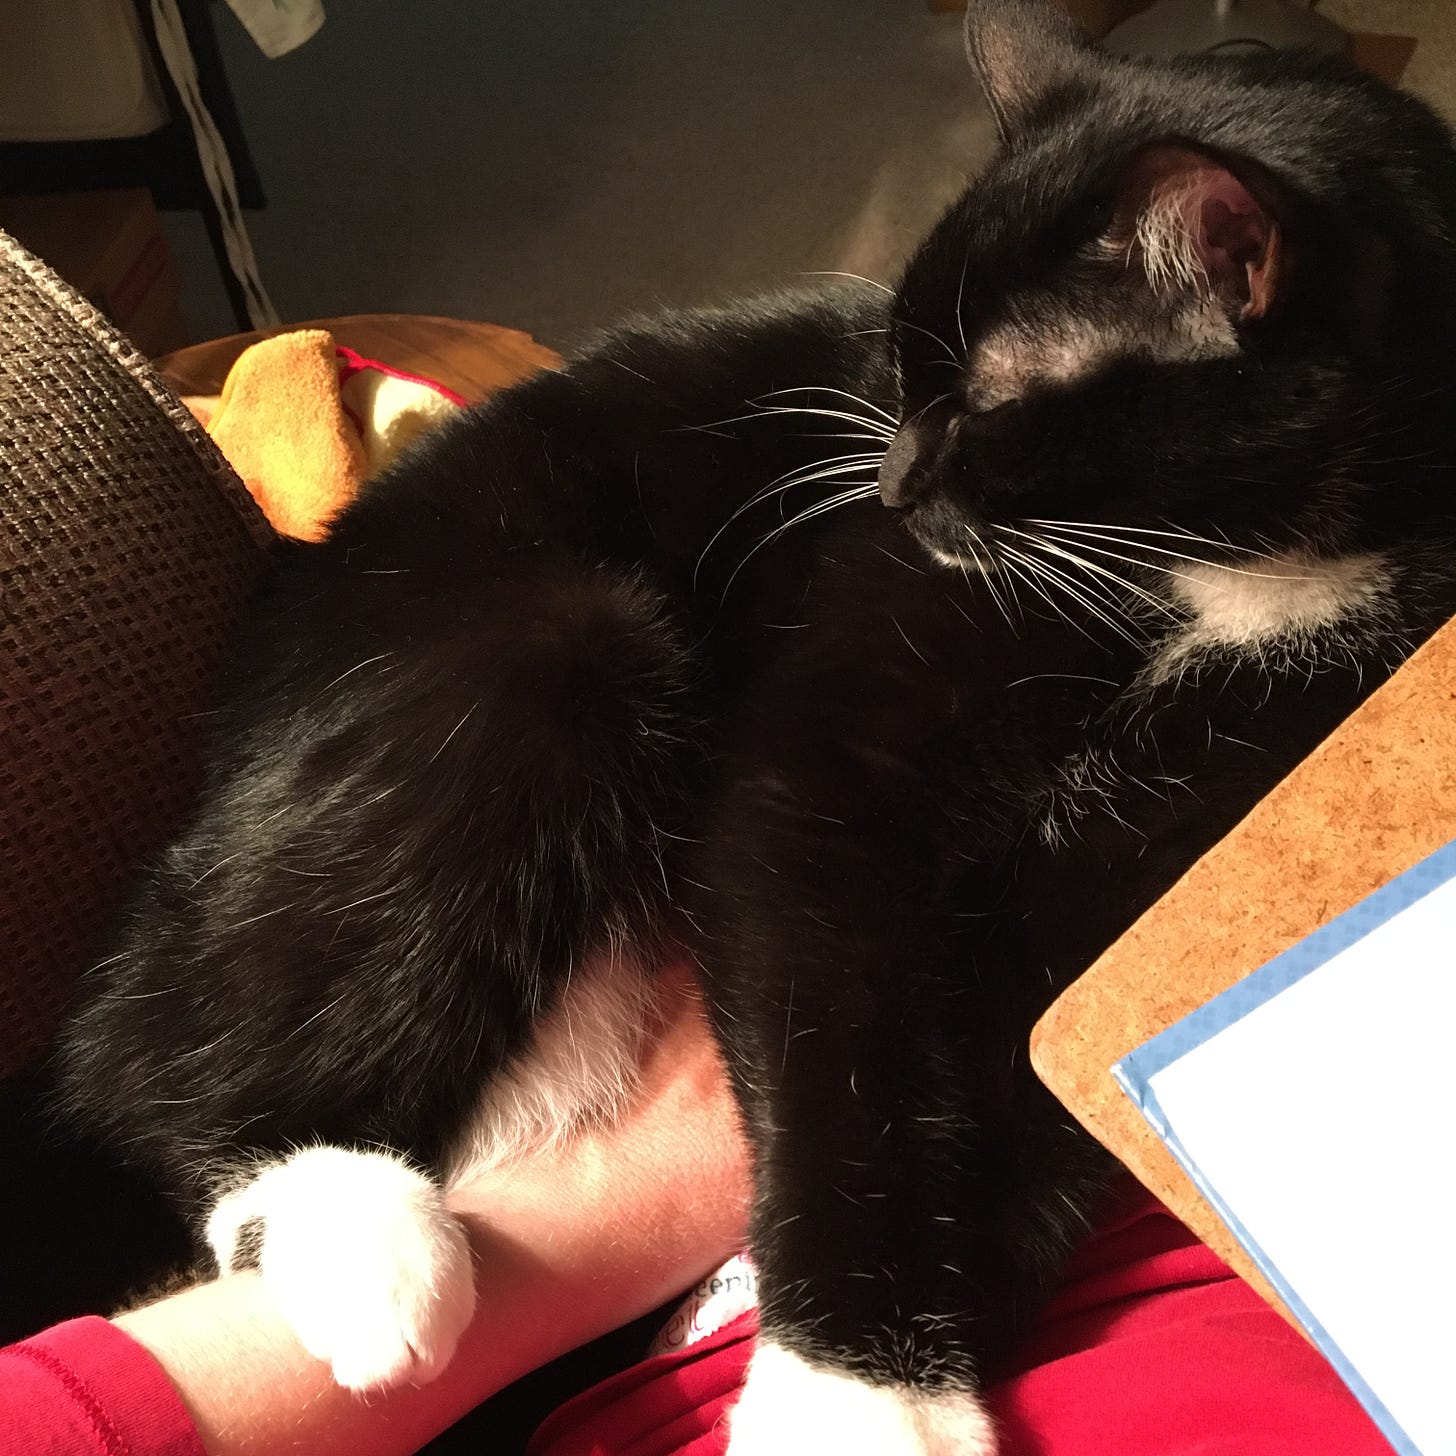 A black cat with white paws and chin sits next to a large book with a person's hand against her belly.